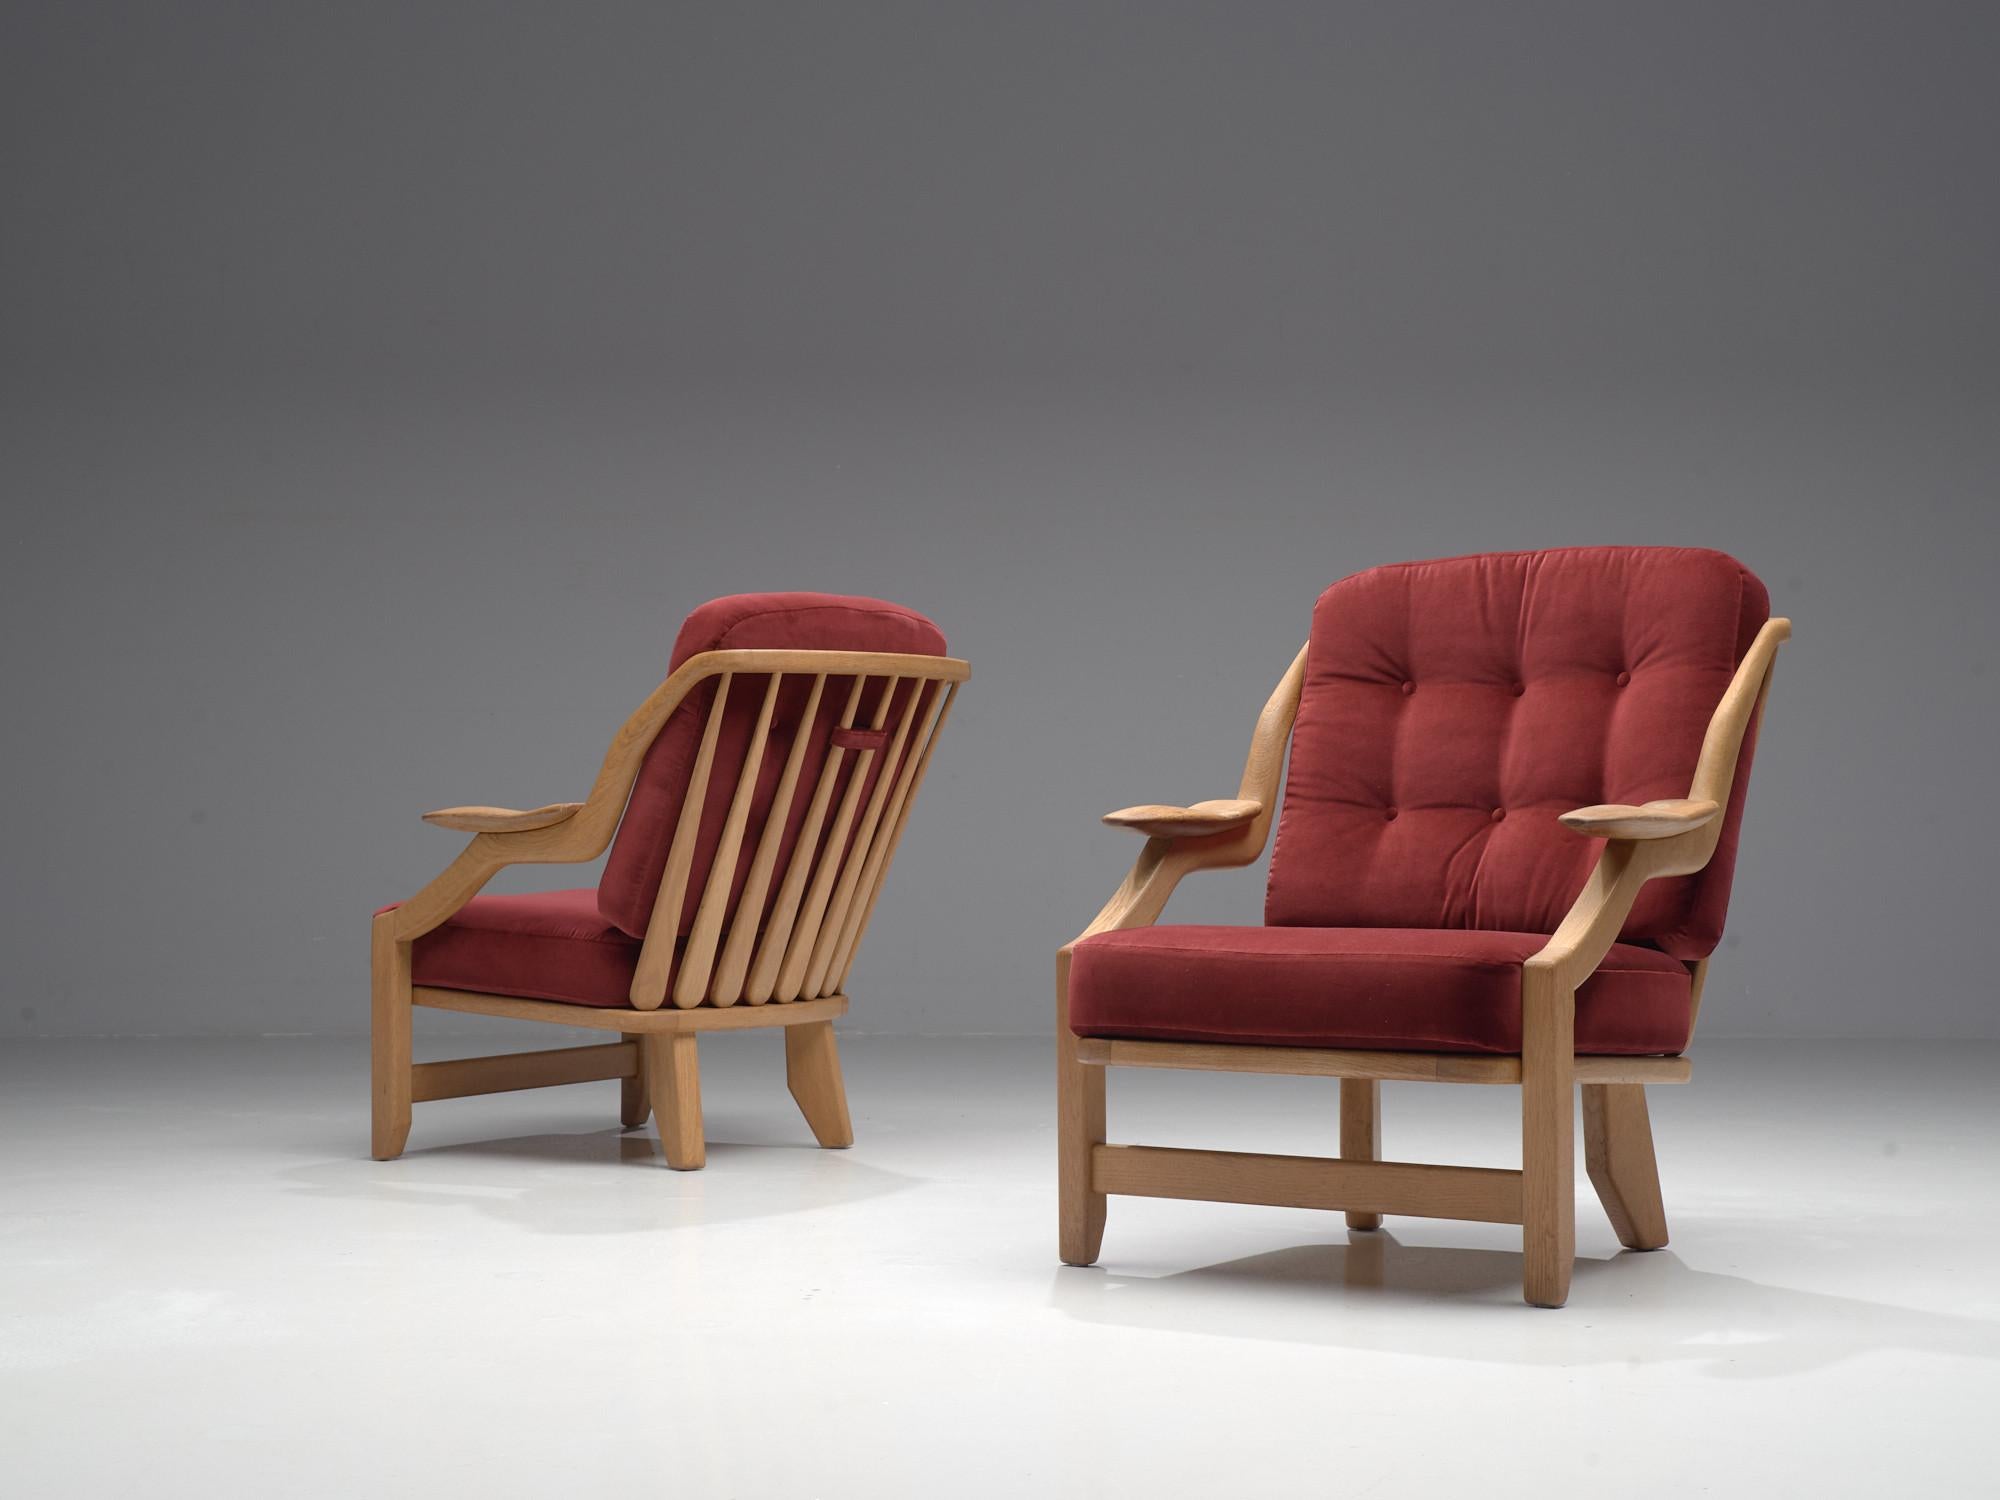 Guillerme et Chambron for Votre Maison, pair of lounge chairs, model 'Gregoire', burgundy red fabric, oak, France, 1960s

Pair of armchairs designed by Guillerme and Chambron. These chairs have a very interesting shape looking from the side. The